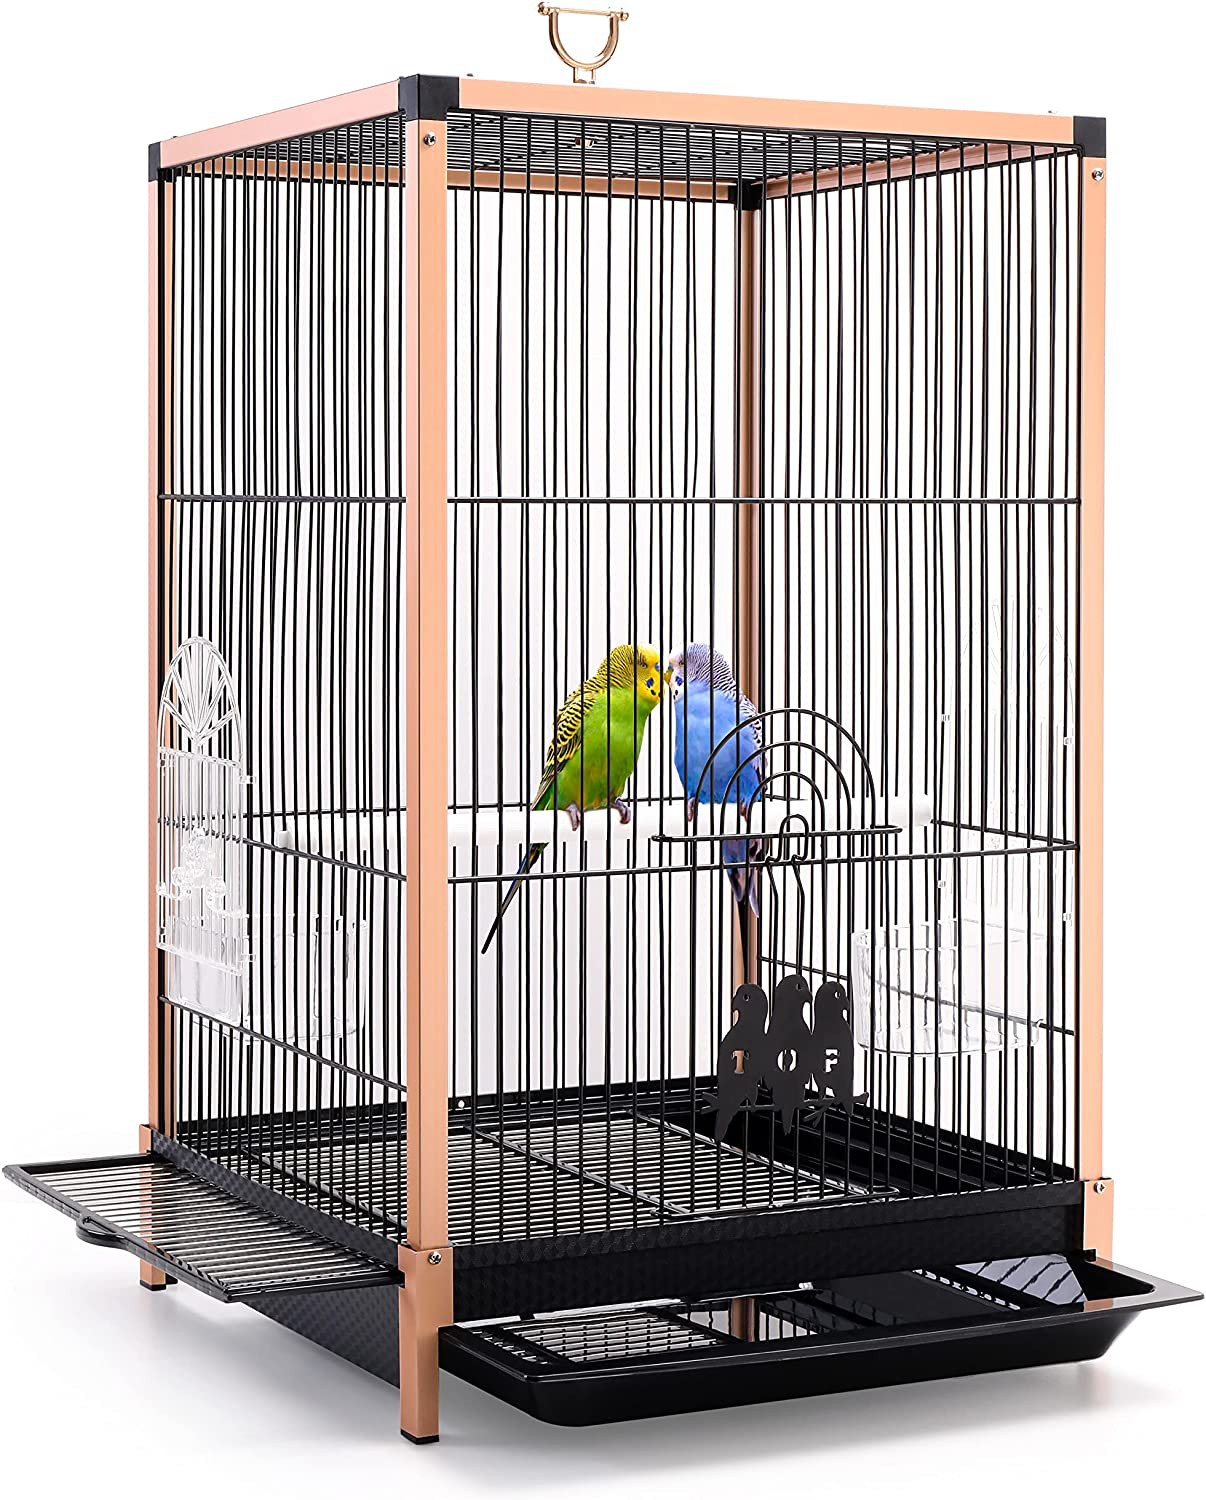 Apebettrel 19 Inch Bird Cage for Small Bird, Aluminum Alloy Frame Portable Bird Travel Carrier for Small Parrot, Lovebirds, with Sliding Iron Door/Bird Bath Tray/2 Feeders/2 Windows Animals & Pet Supplies > Pet Supplies > Bird Supplies > Bird Cage Accessories Apebettrel Square-Roof (Hanging, Bigger Space)  